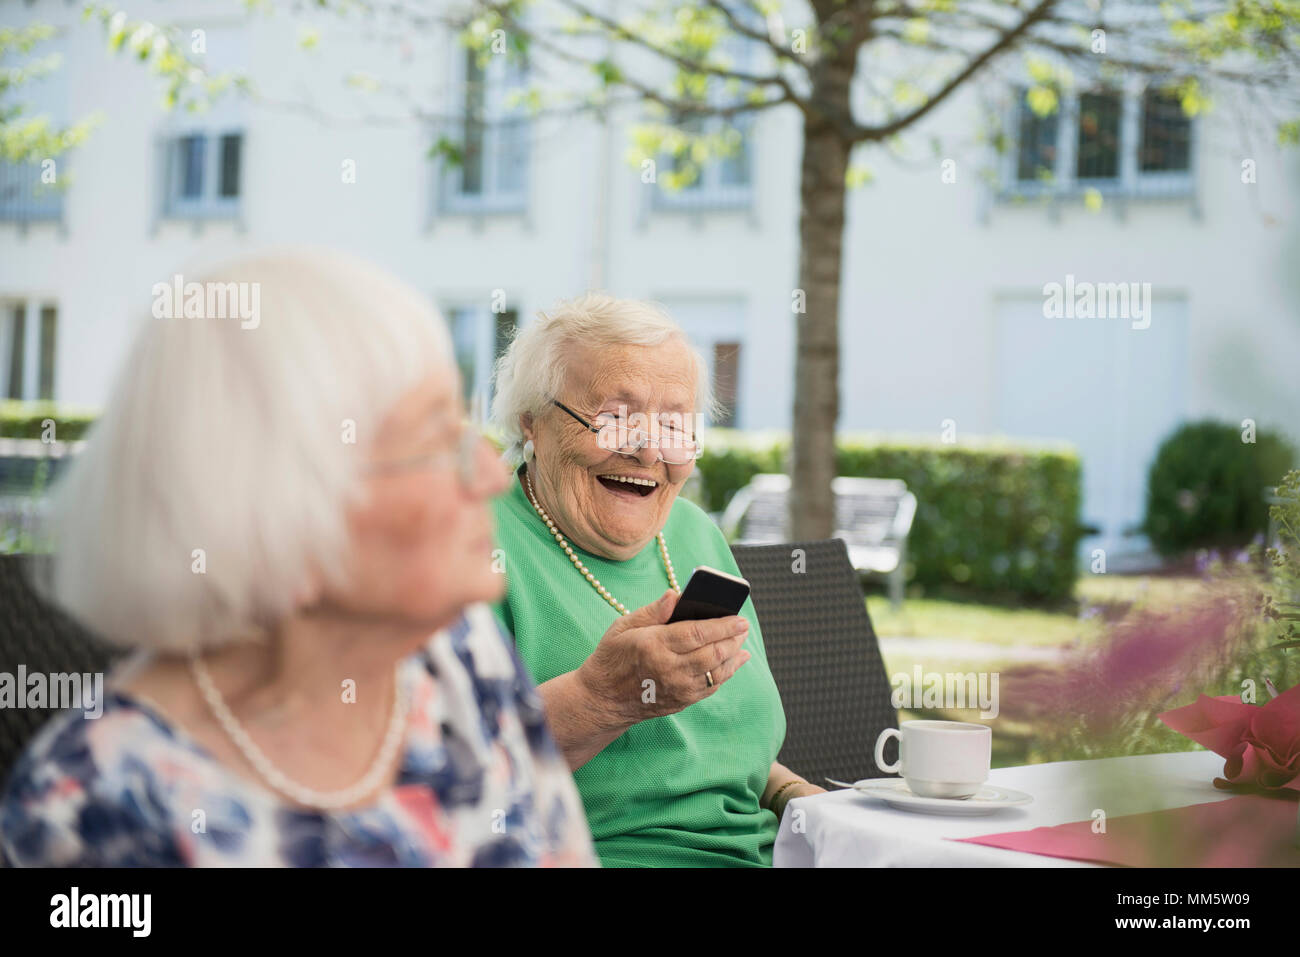 Senior woman laughing and using smartphone Stock Photo